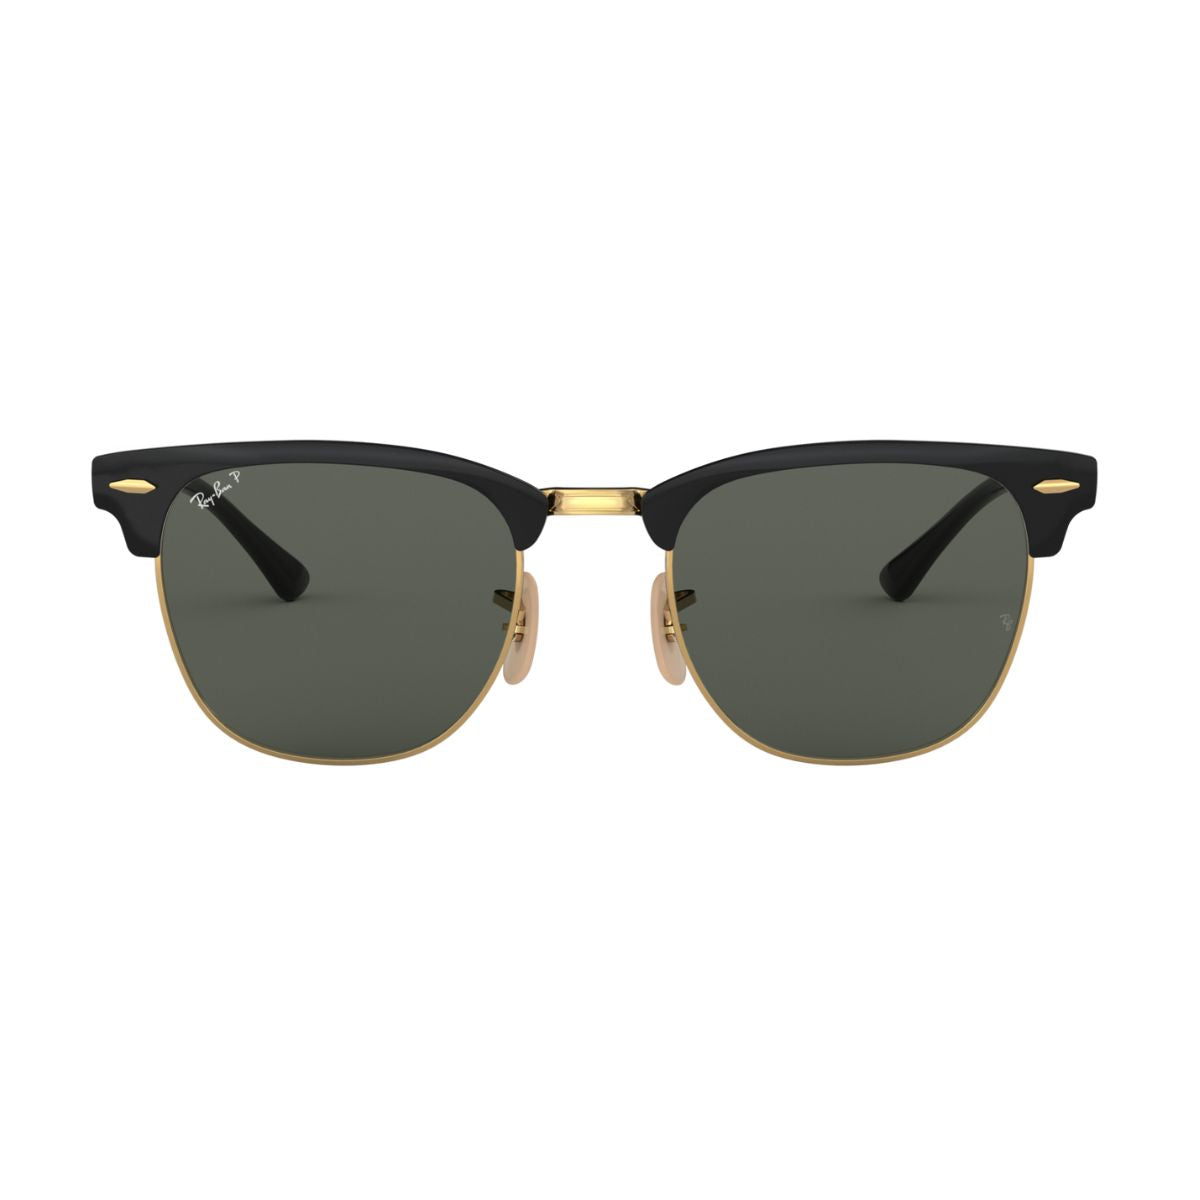 "Ray Ban 3716 187/58 Polarized Sunglass For Men And Women At Optorium"